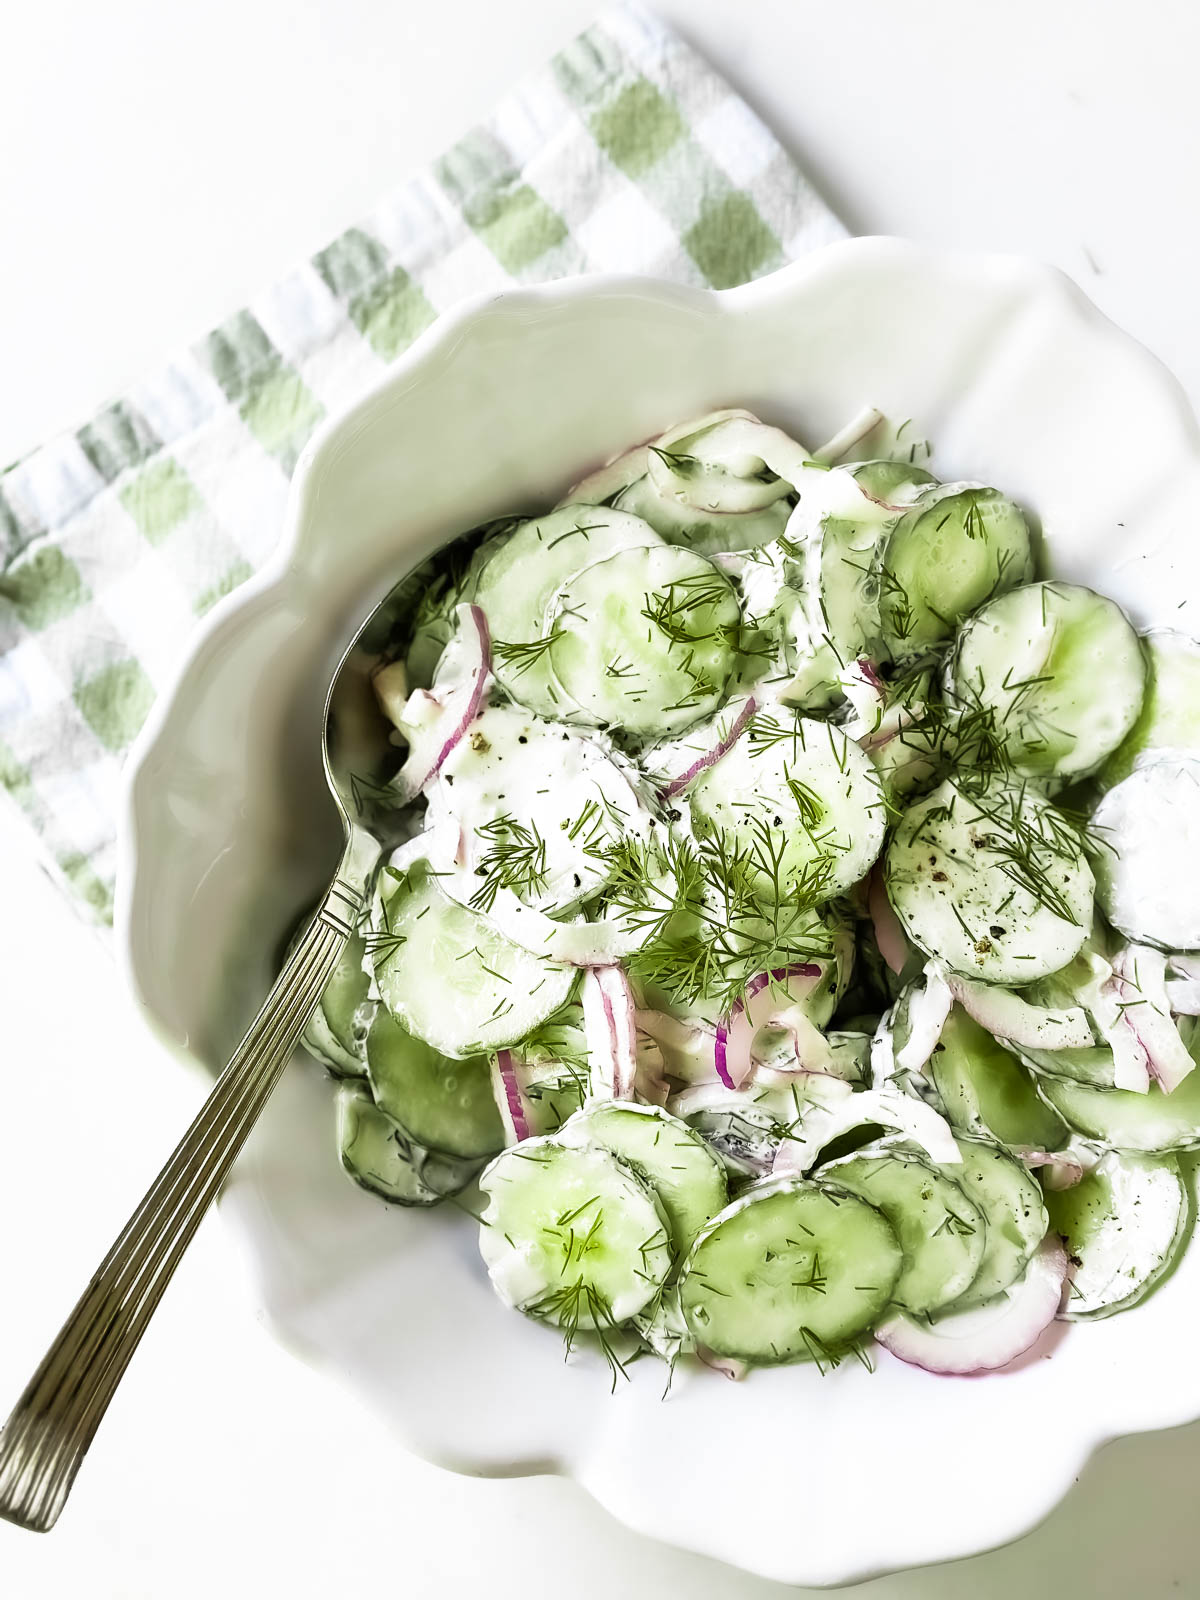 Classic cucumber salad in a white bowl with a checkered napkin.